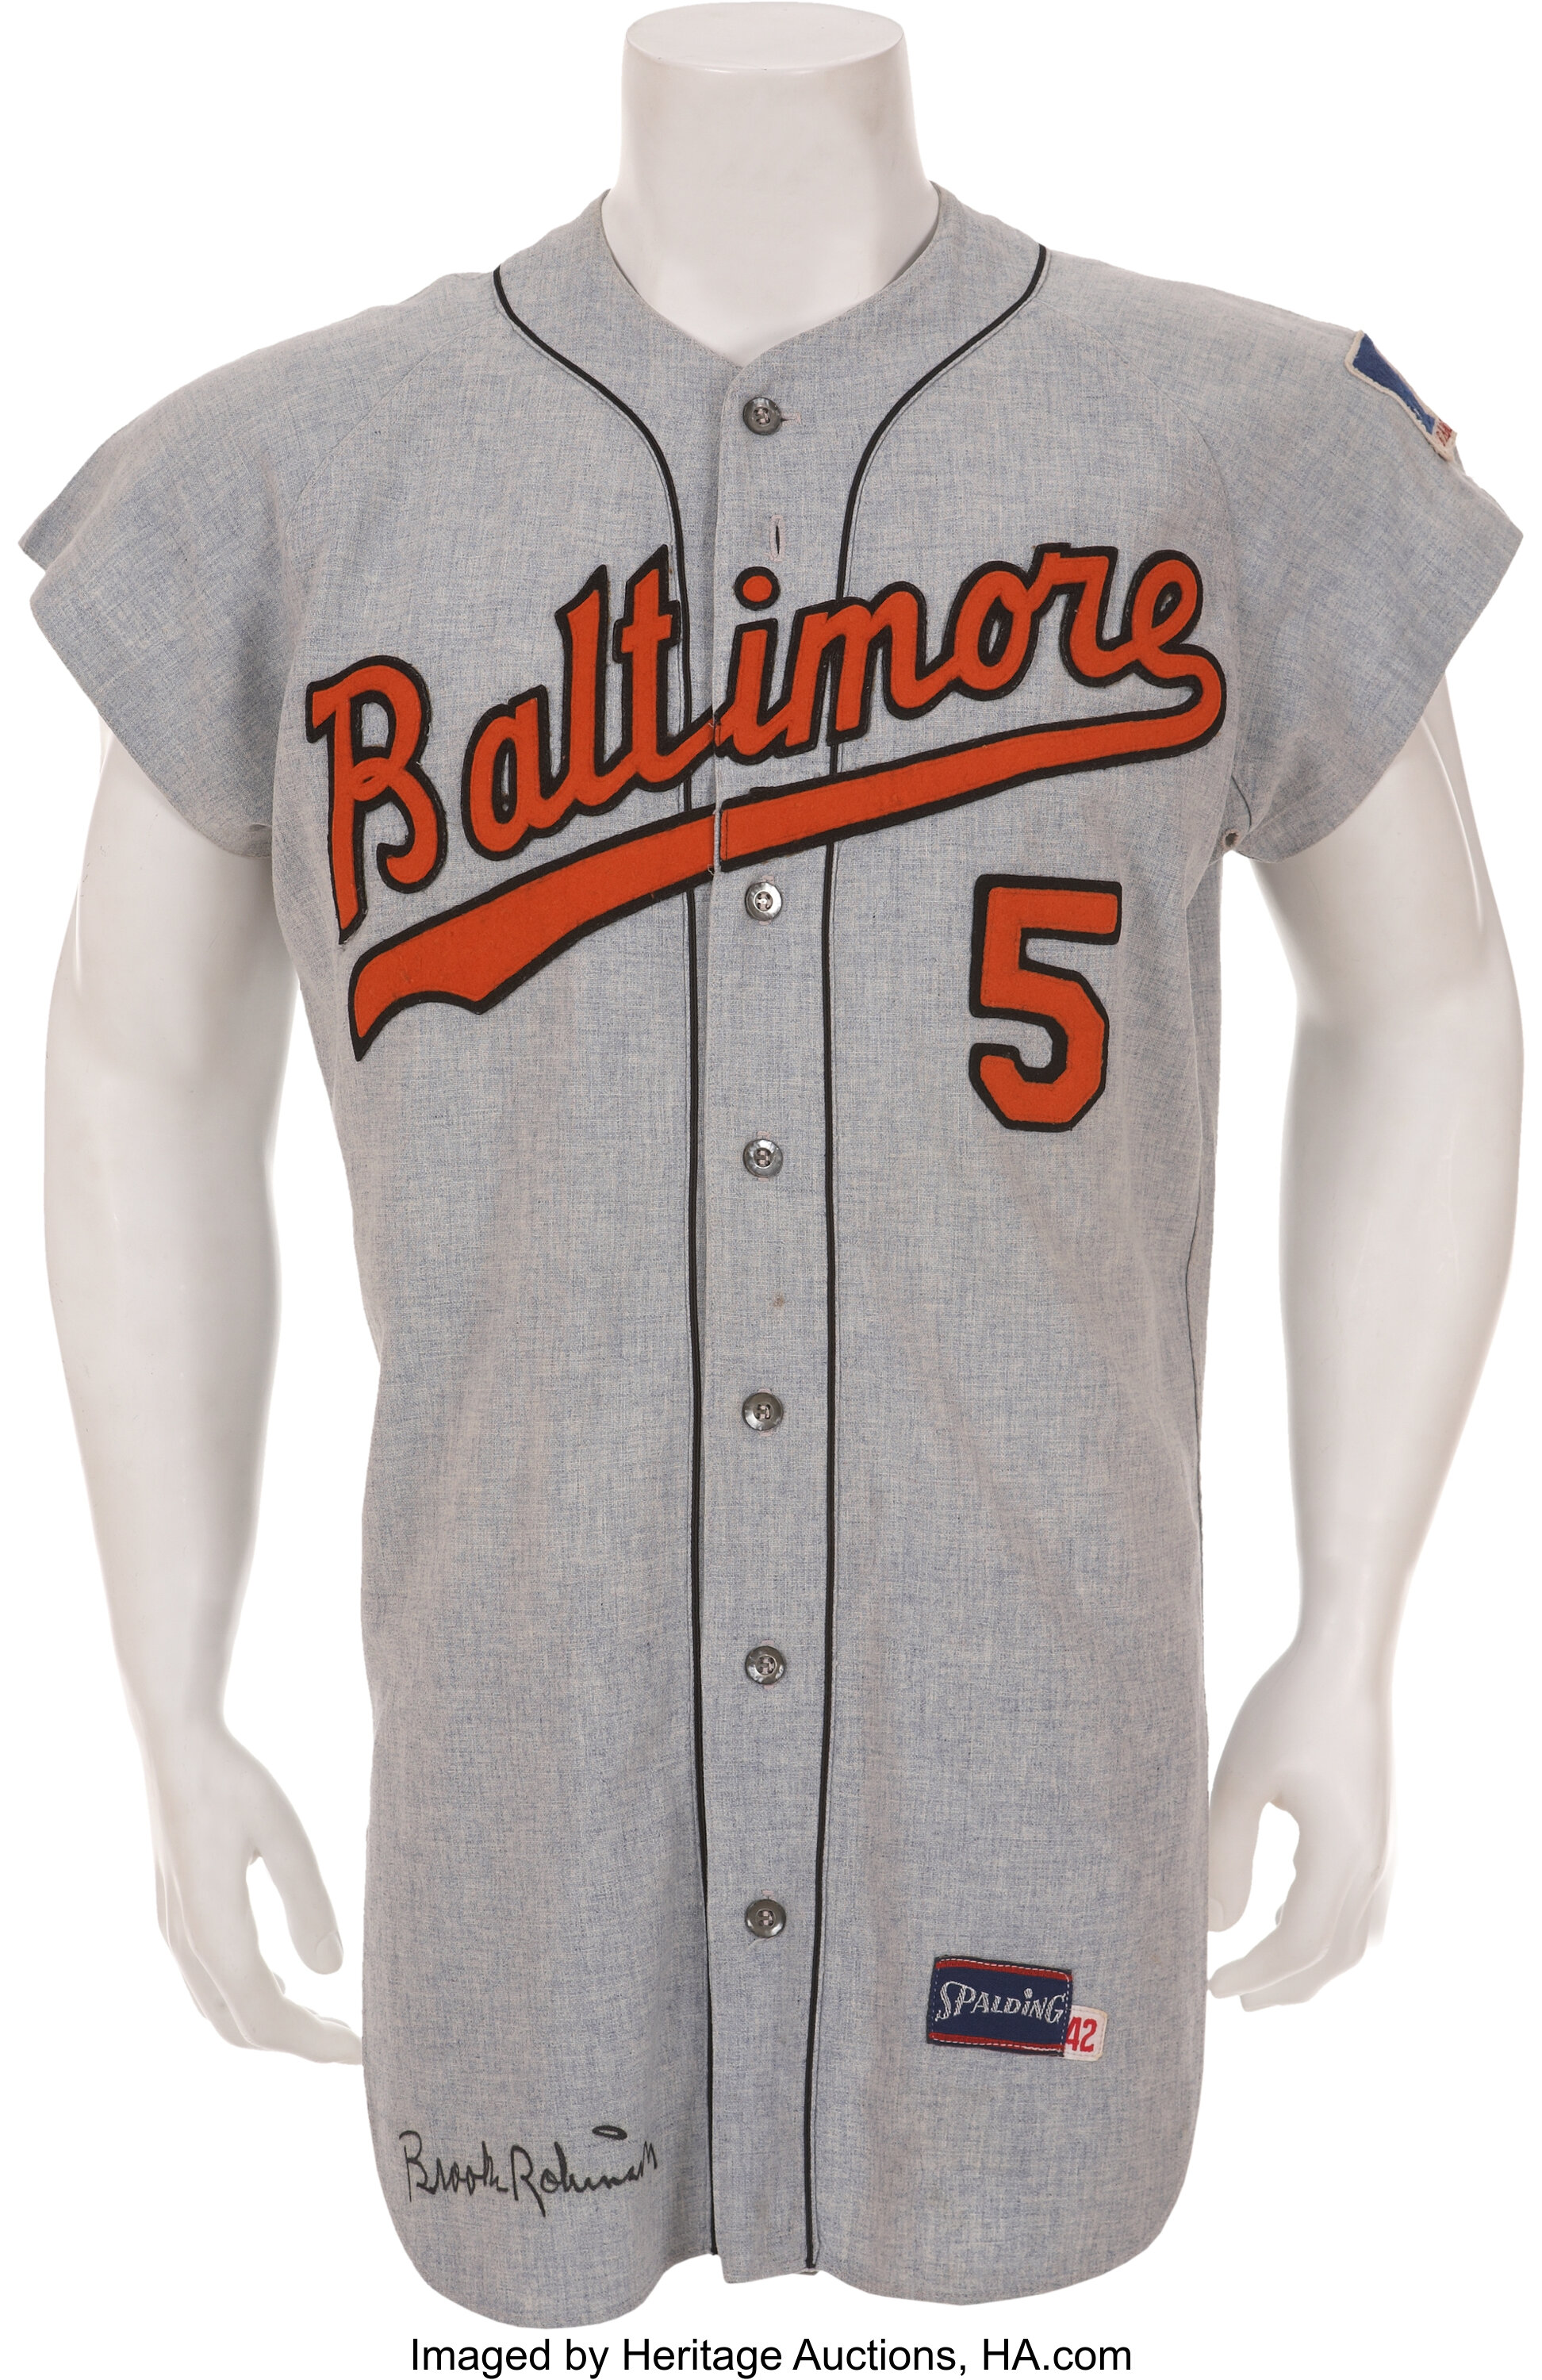 Today in Baltimore Orioles History: July 26, 1996 – Jim Thome and